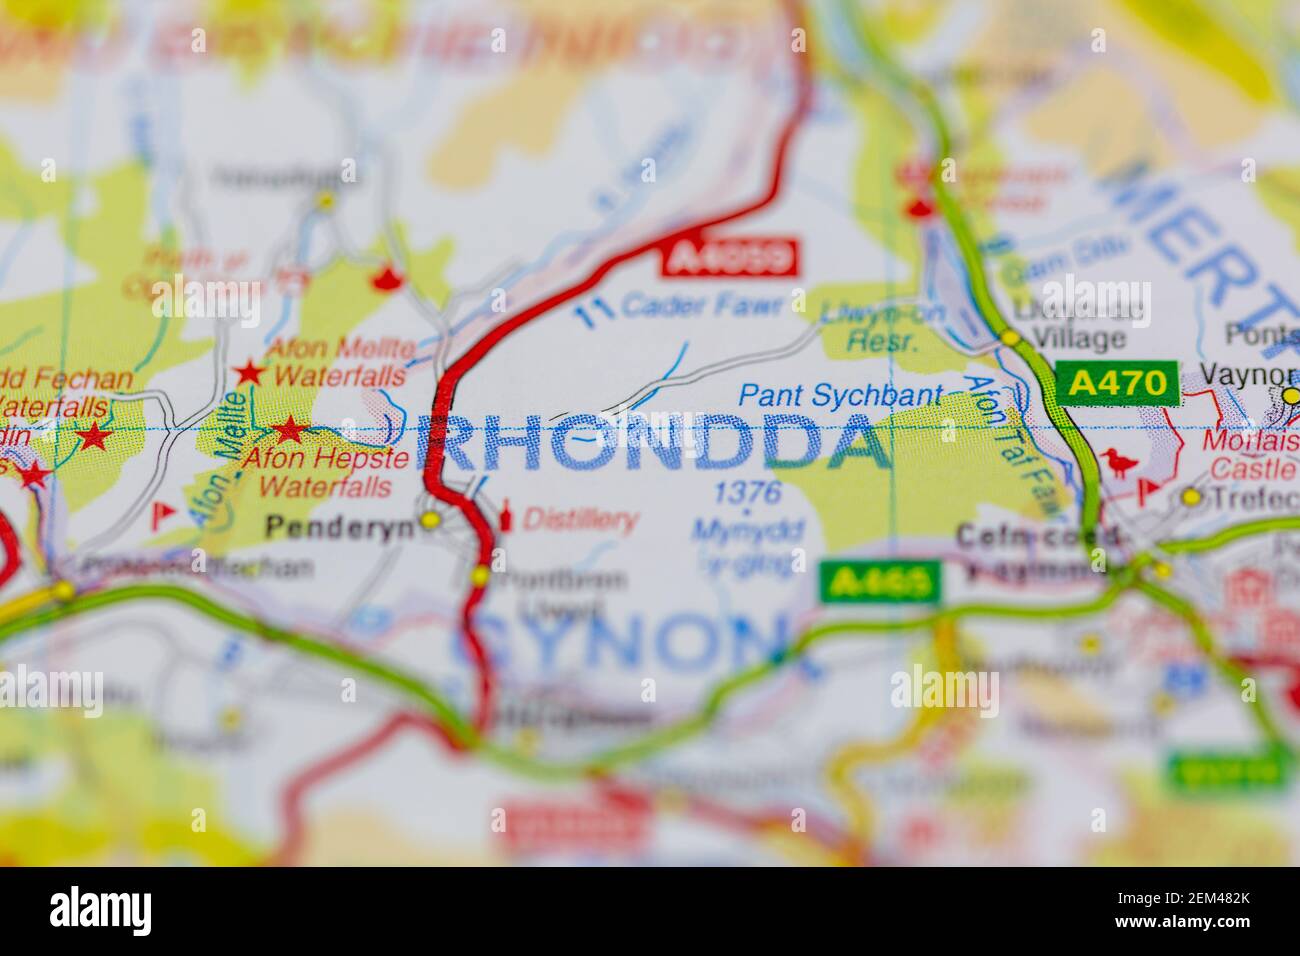 Rhondda shown on a road map or geography map Stock Photo